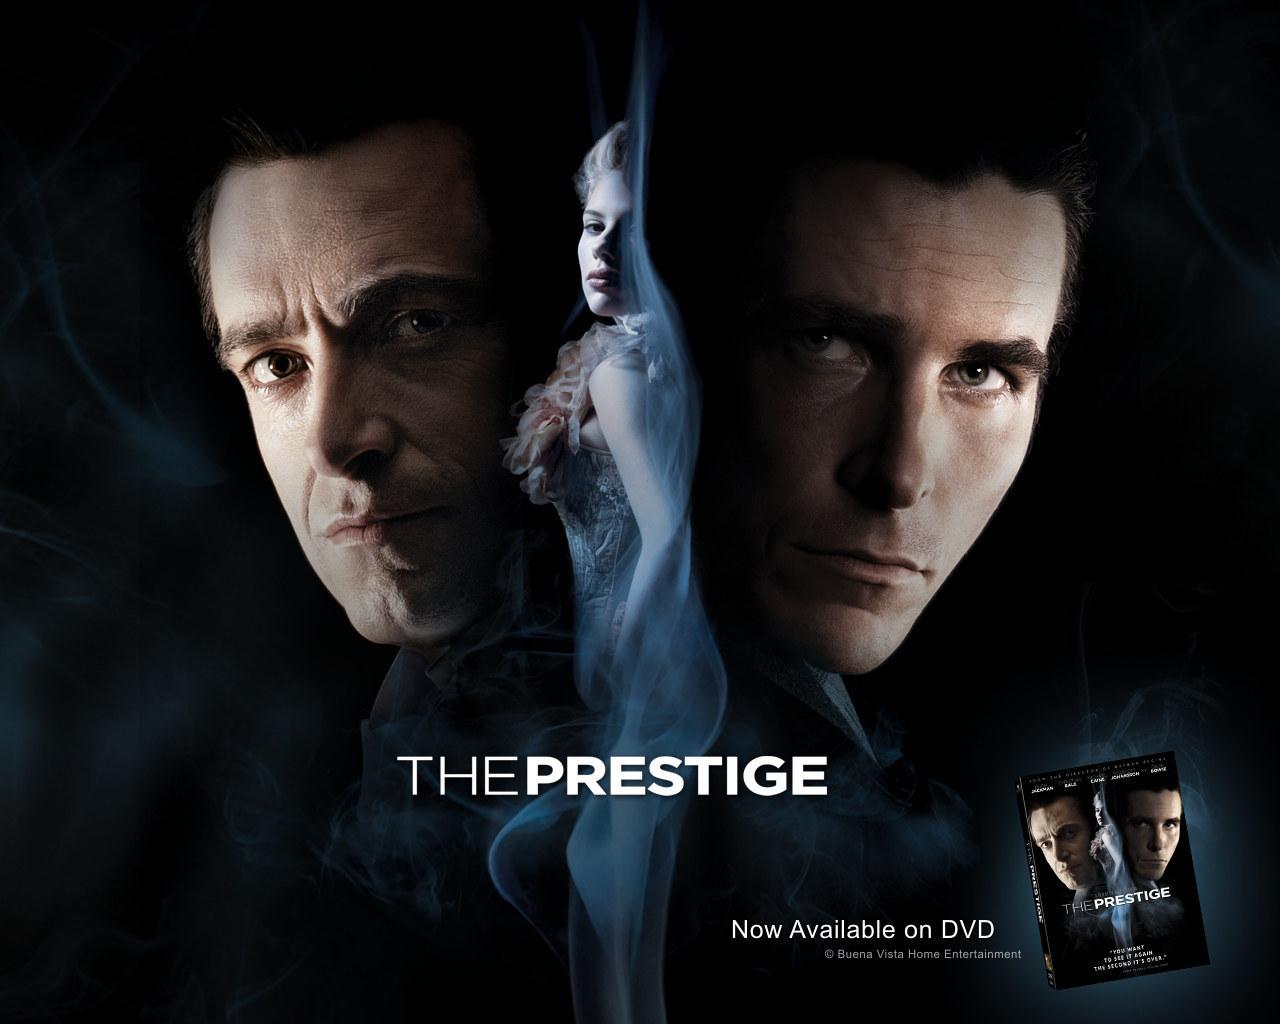 The Prestige Wallpaper The Prestige 2K wallpapers and backgrounds photos